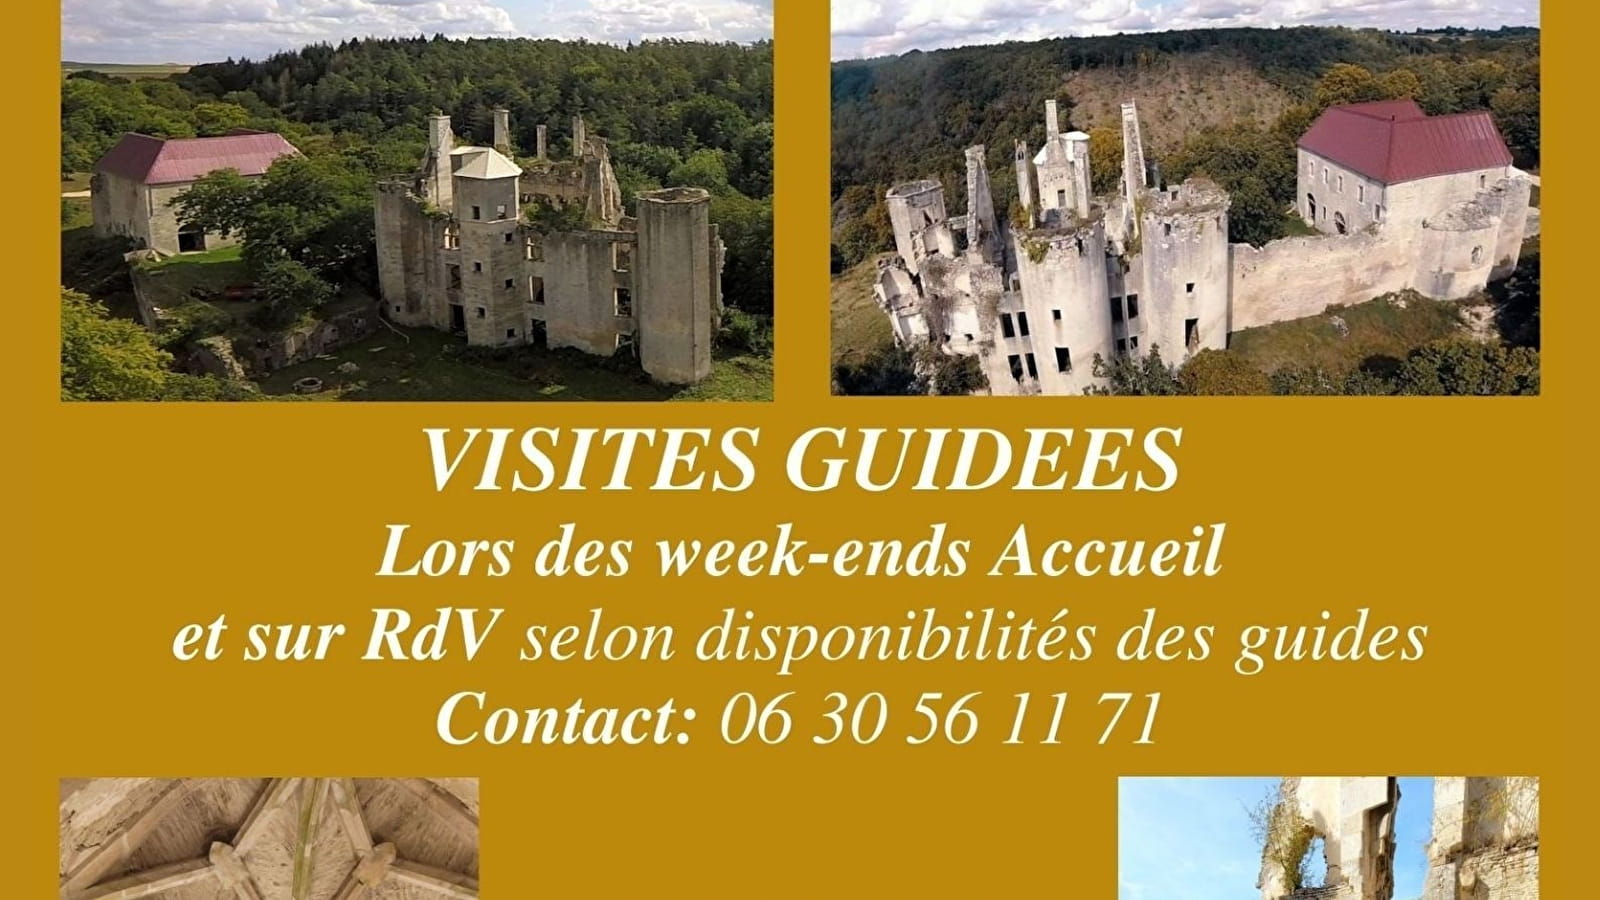 Visits to Château de Rochefort all year round by appointment